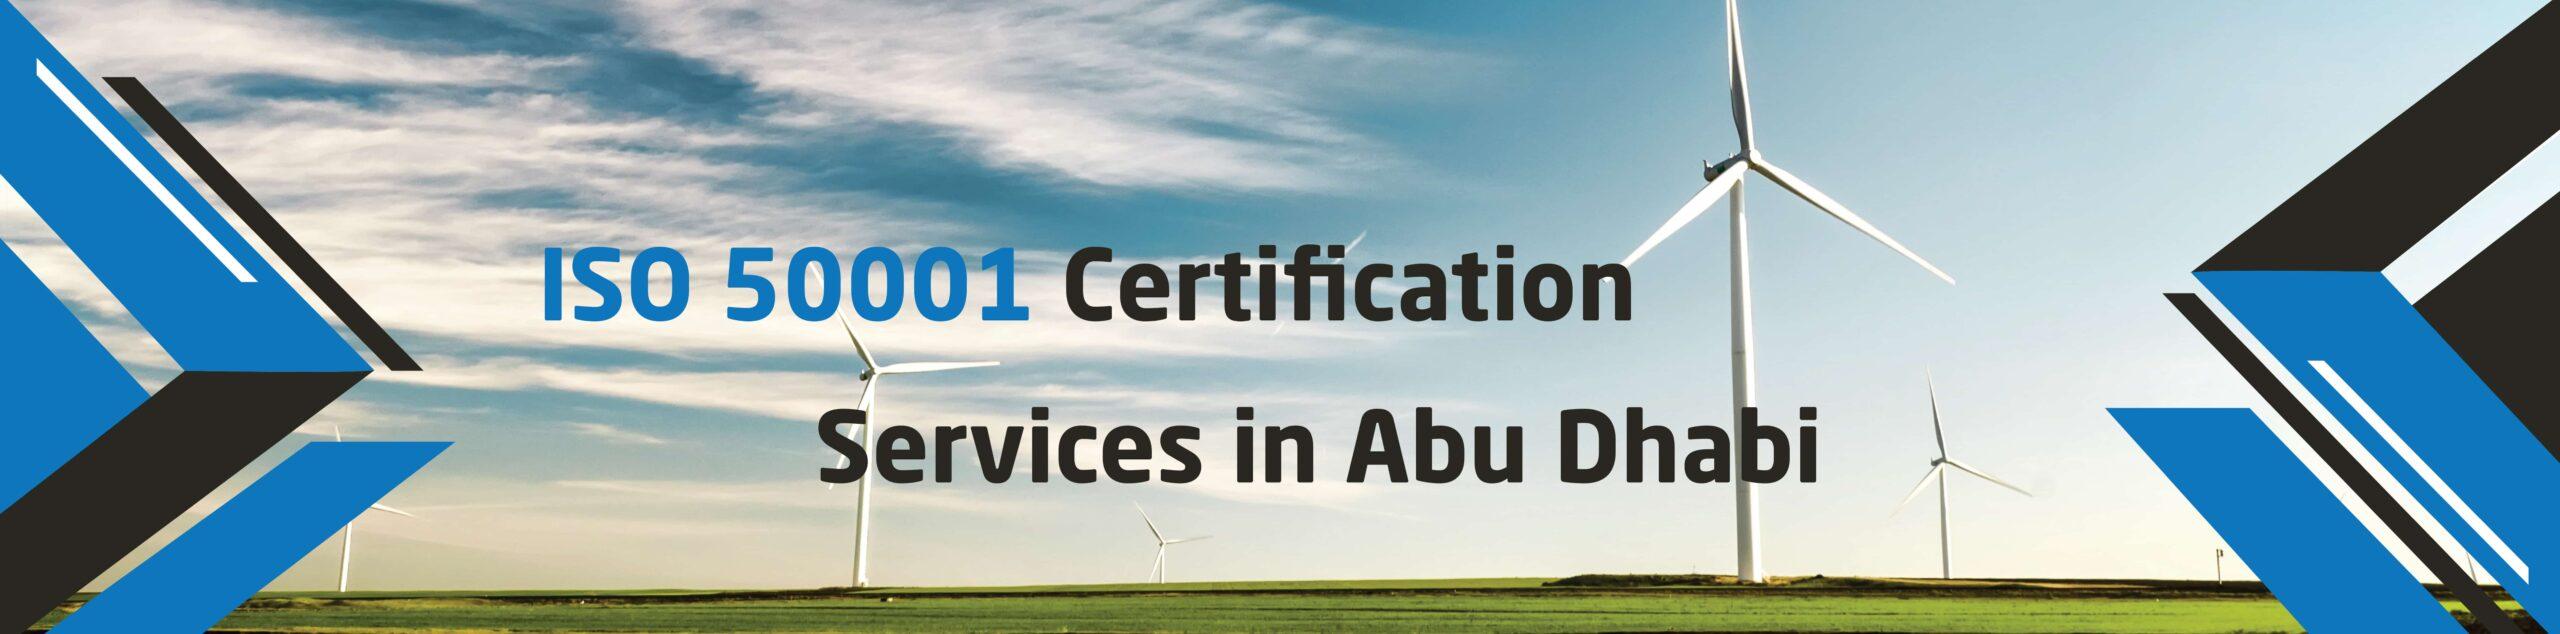 ISO 50001 Certification Services in Abu Dhabi